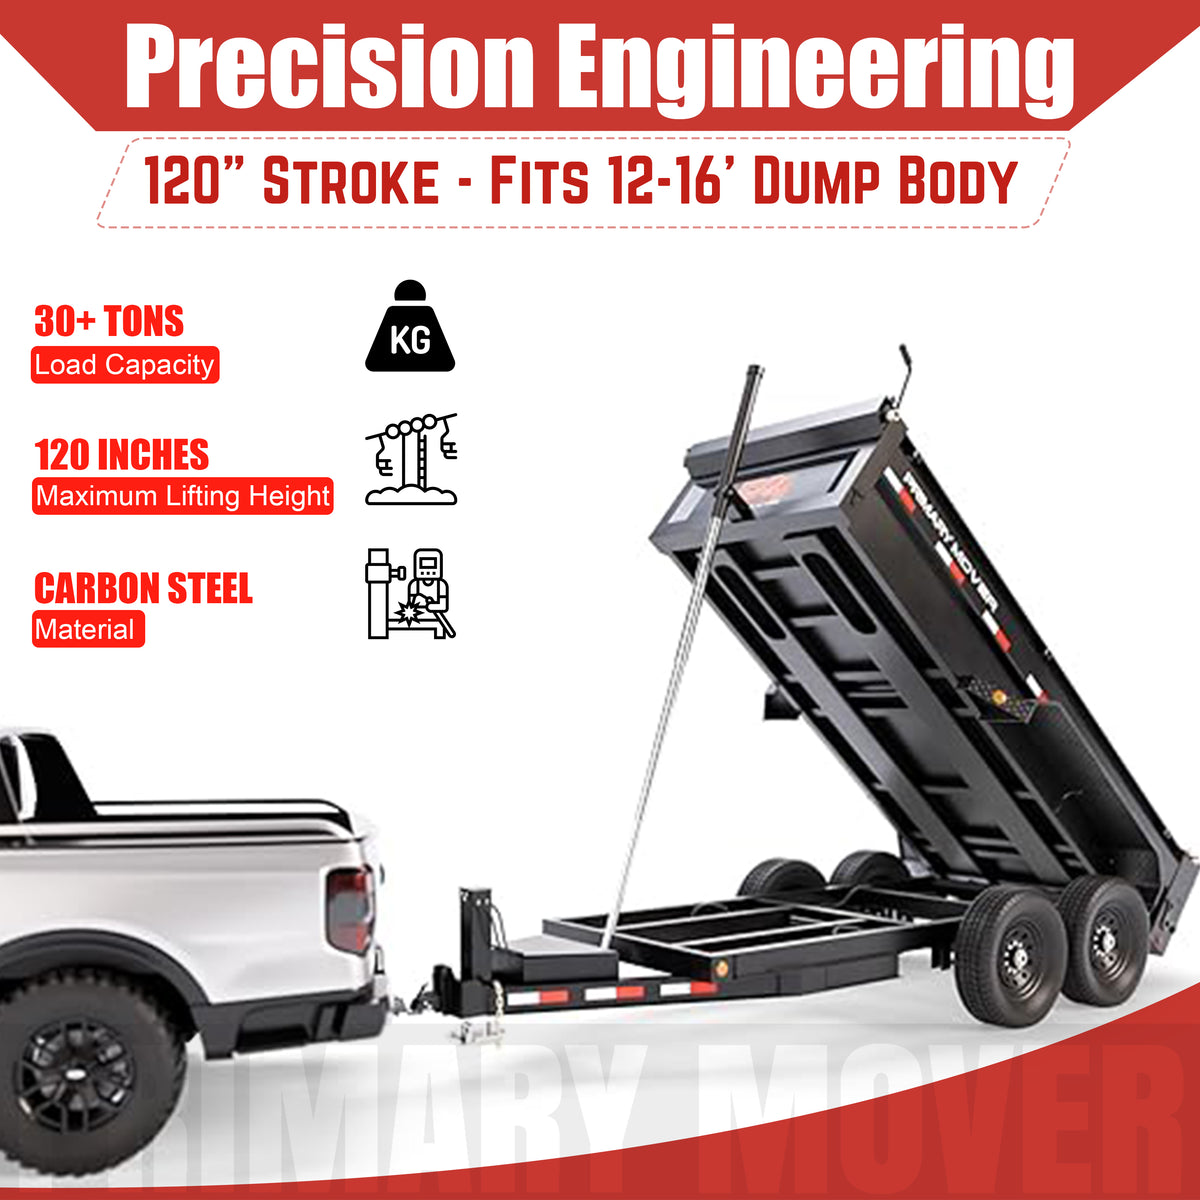 Telescopic Dump Trailer Cylinder Kit - 30 Ton Capacity - 120 Stroke - Fits 12-16' Dump Body, shown with a black trailer attached to a white truck.